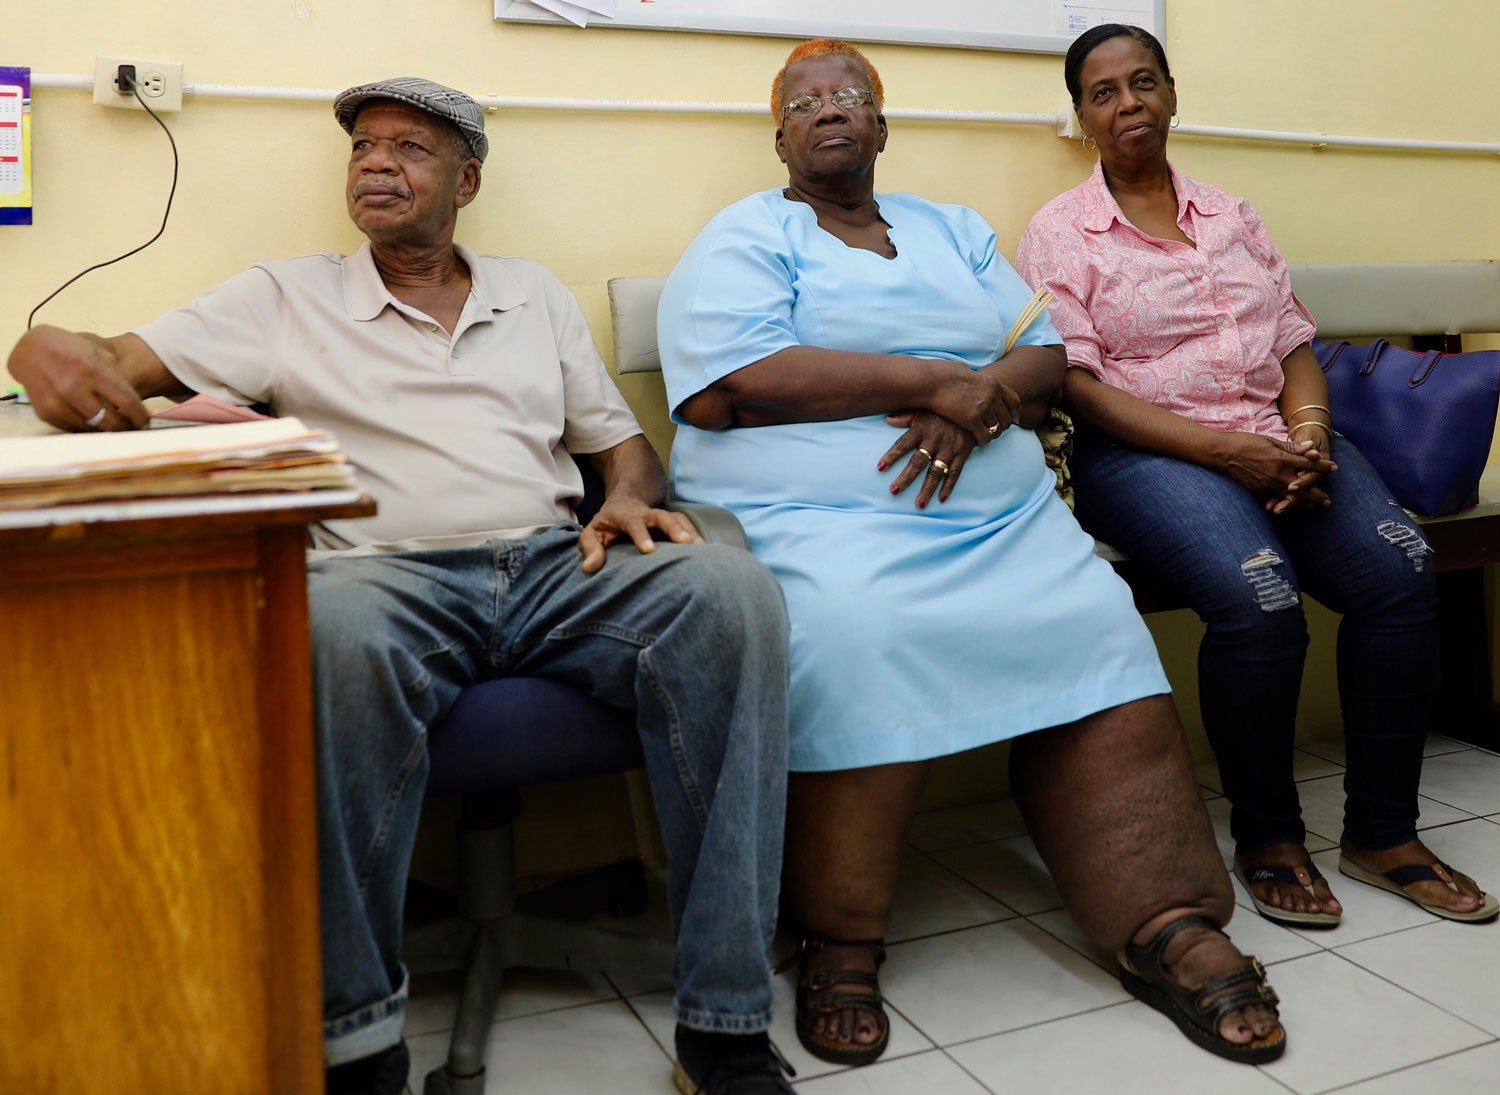 Woman with lymphatic filariasis waits in doctor's office.